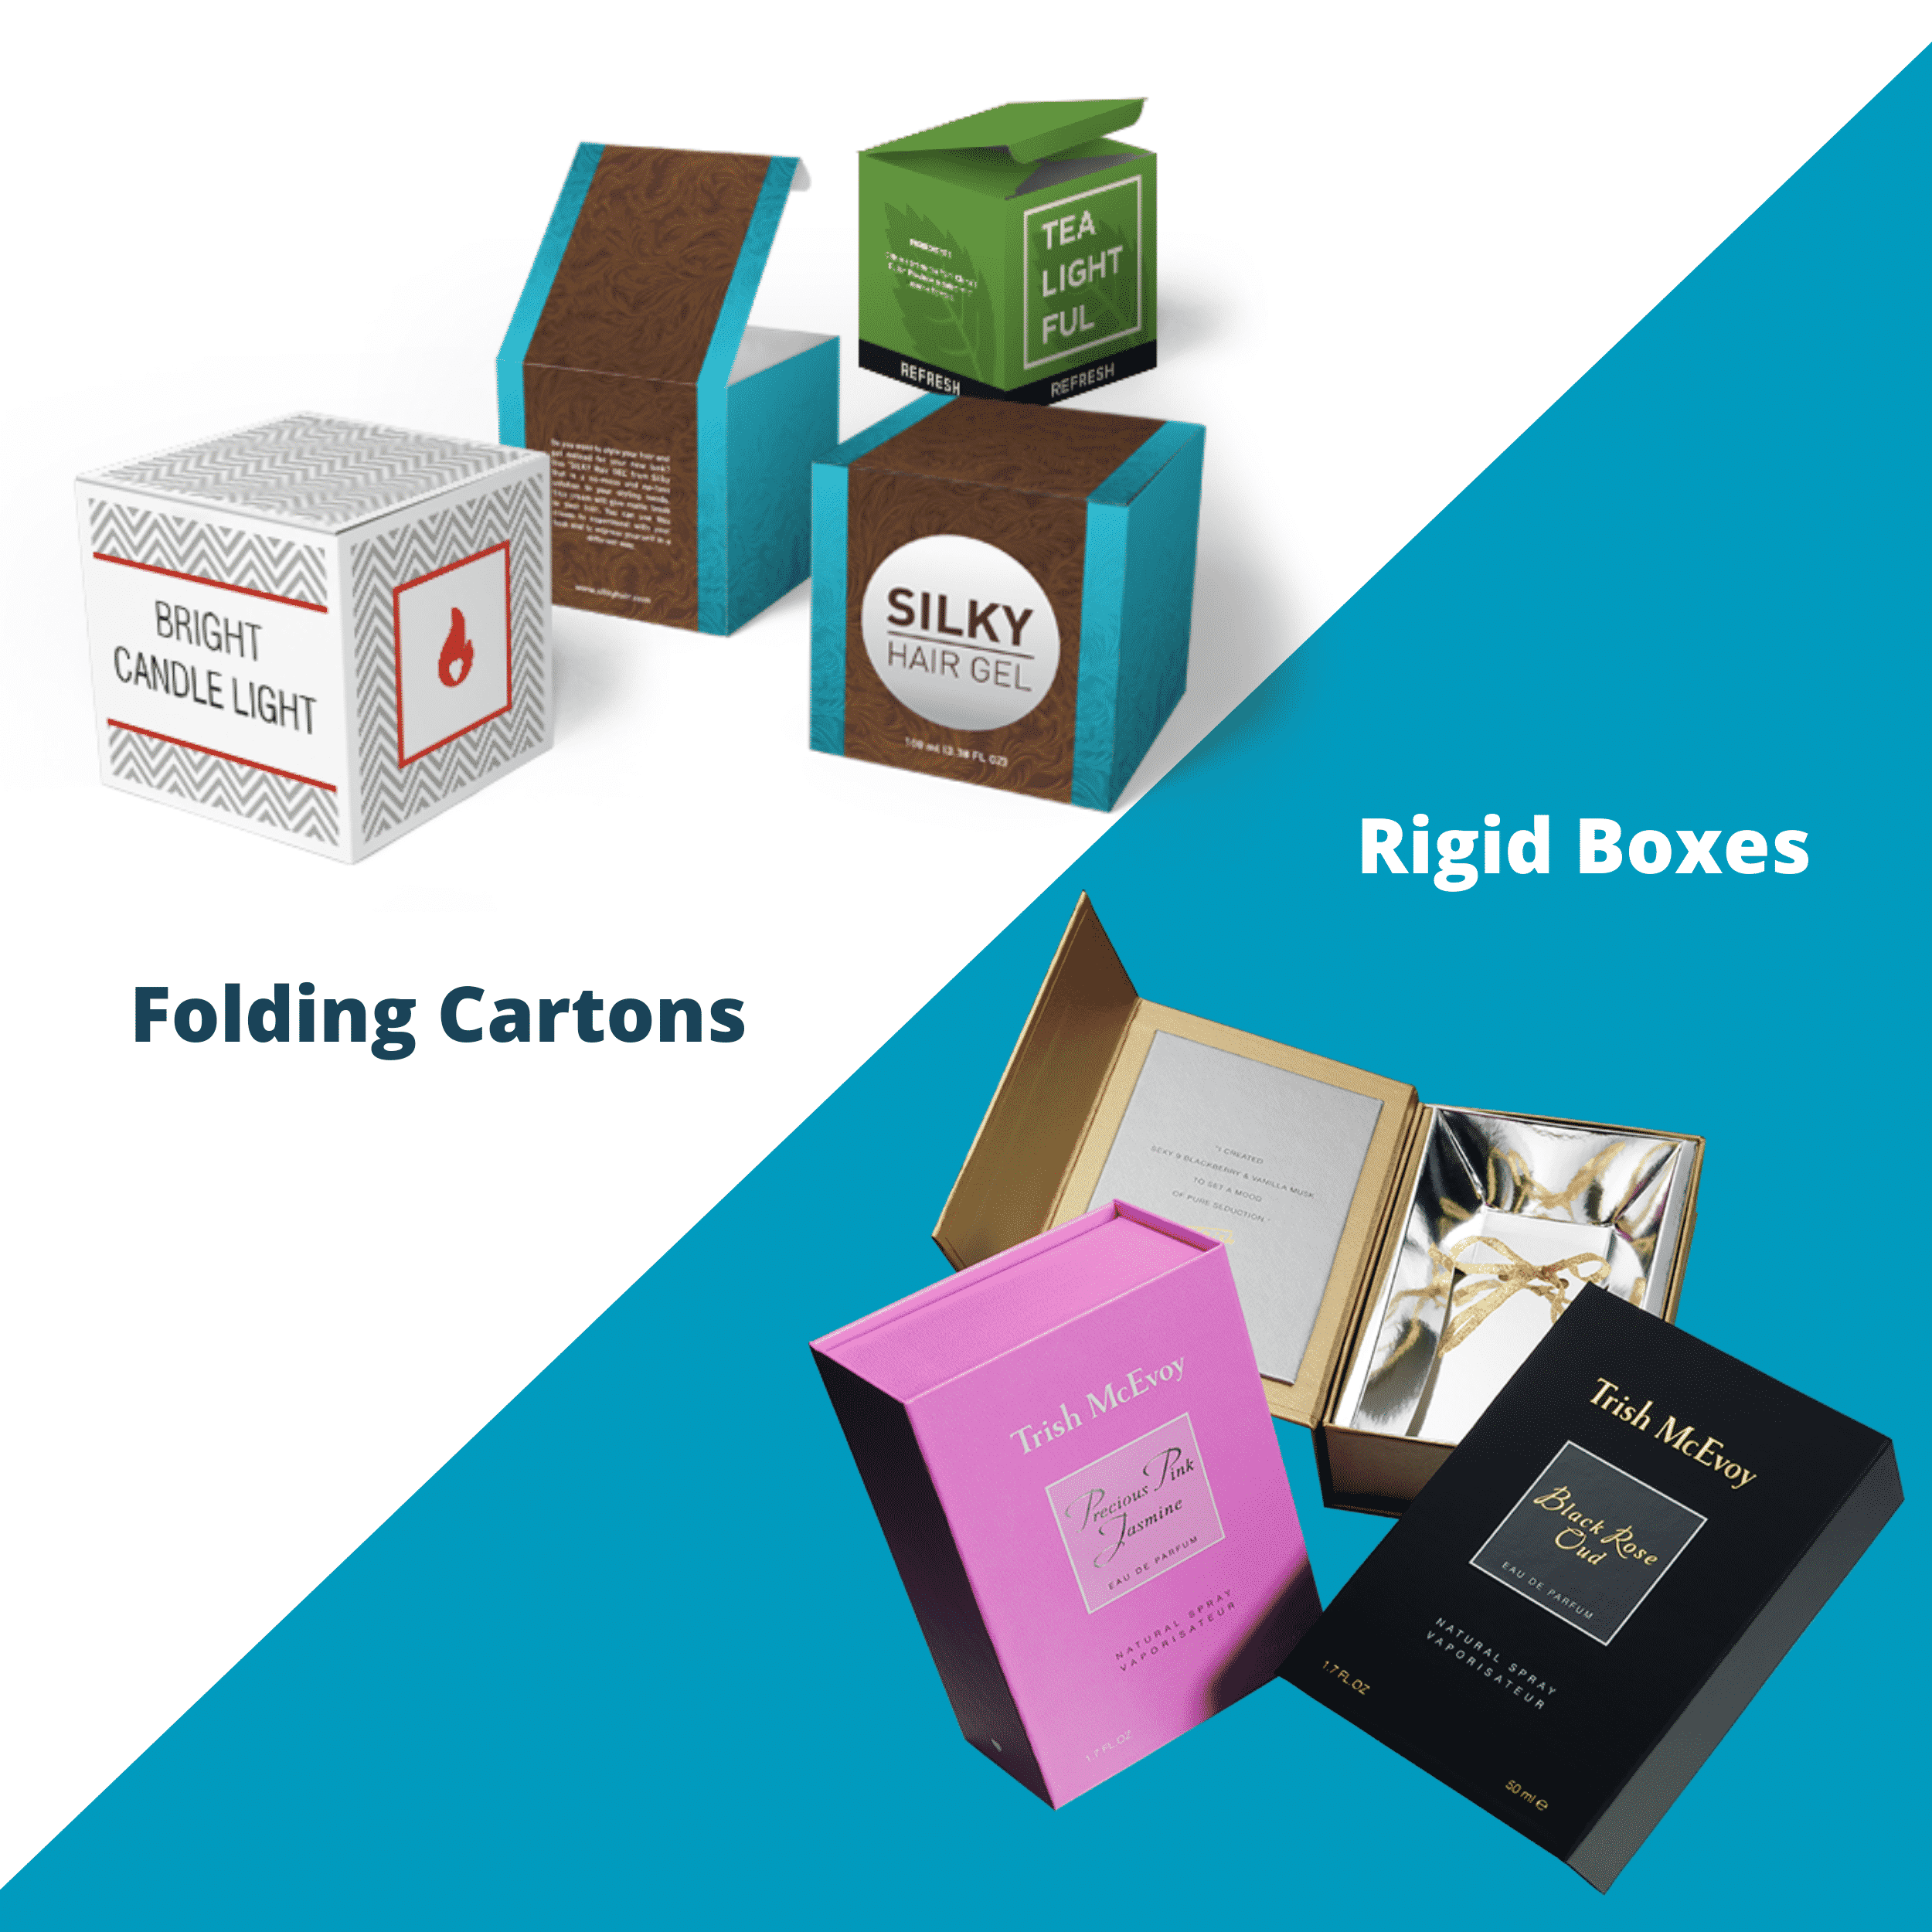 Folding Carton Vs Rigid Boxes: Which One Should You Choose?